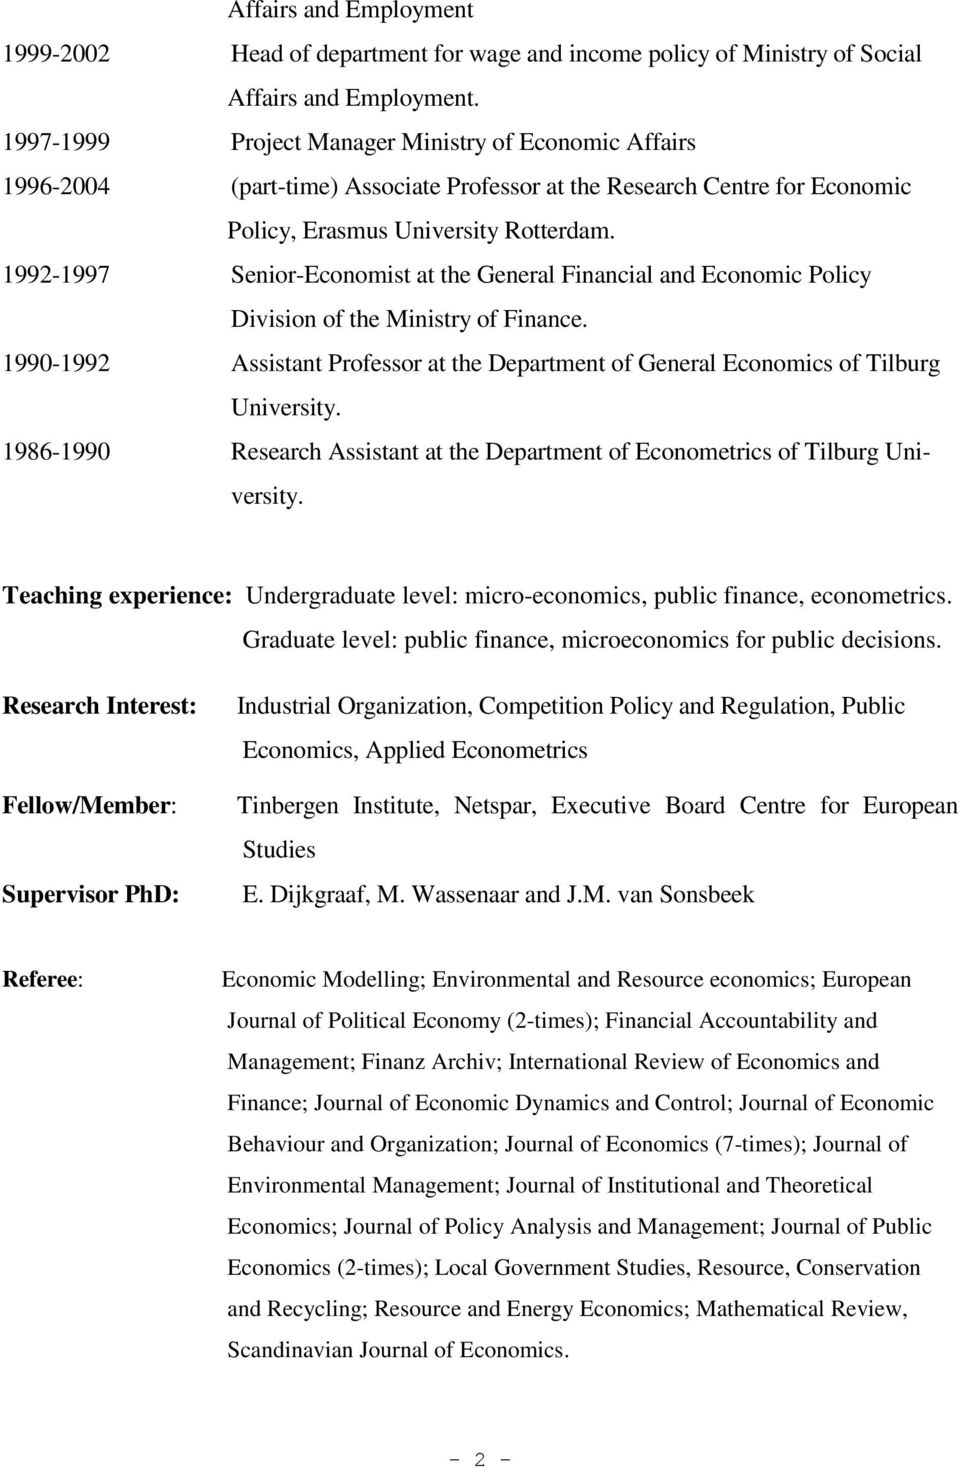 1992-1997 Senior-Economist at the General Financial and Economic Policy Division of the Ministry of Finance. 1990-1992 Assistant Professor at the Department of General Economics of Tilburg University.